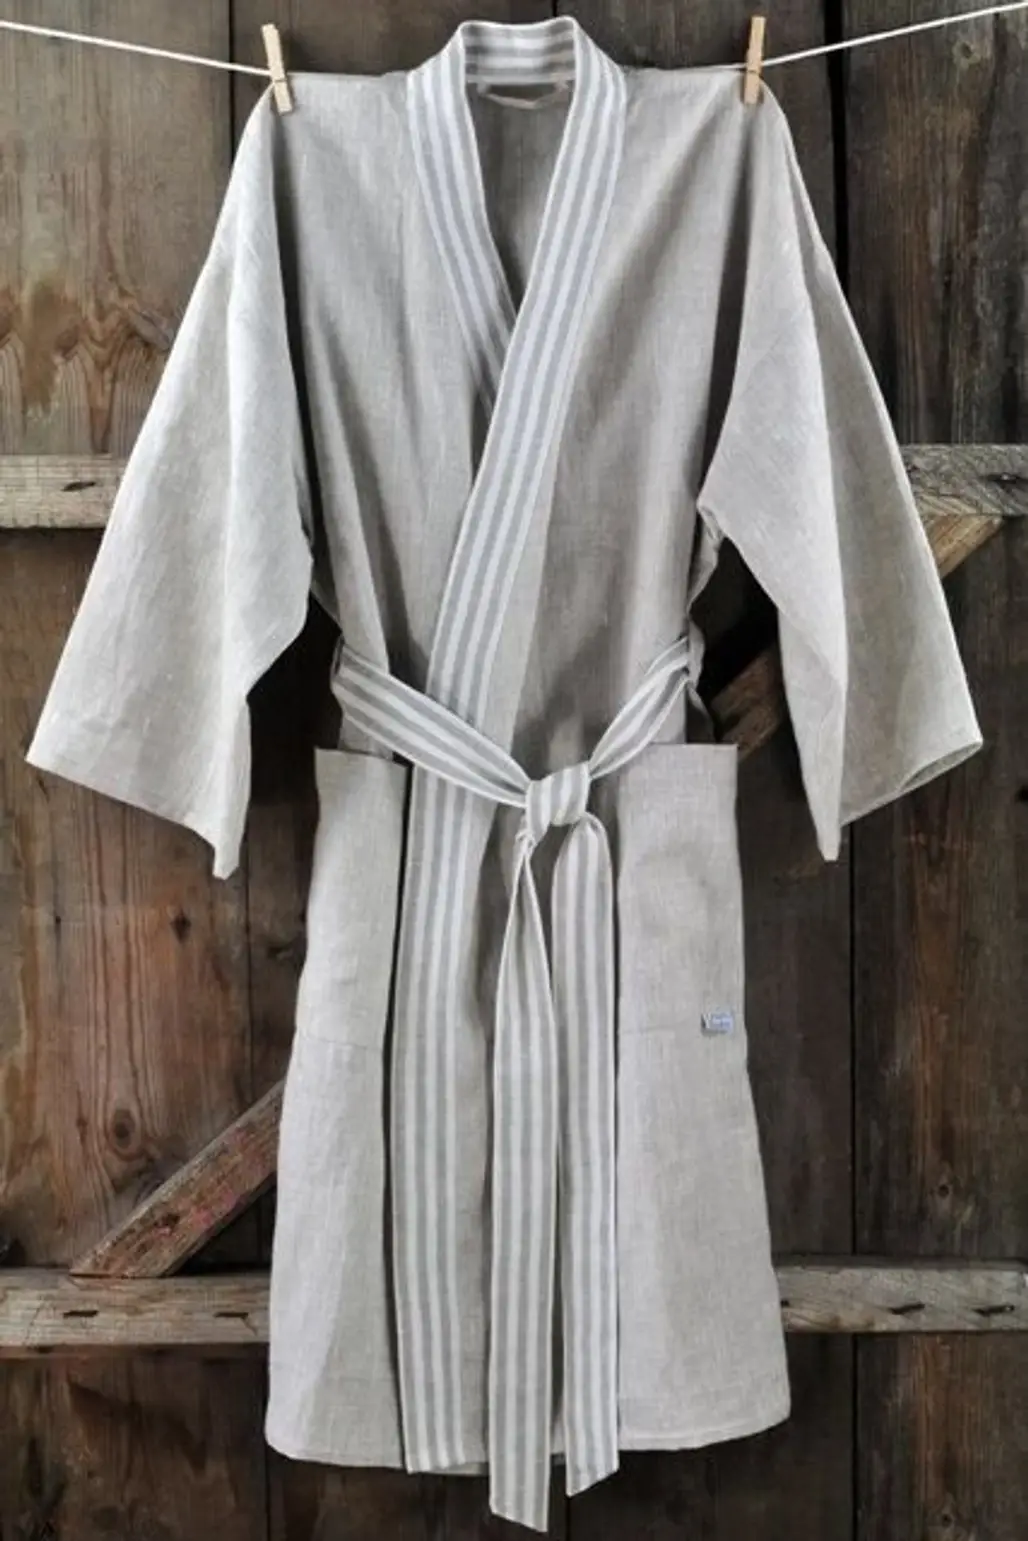 Purchase a Fluffy Robe